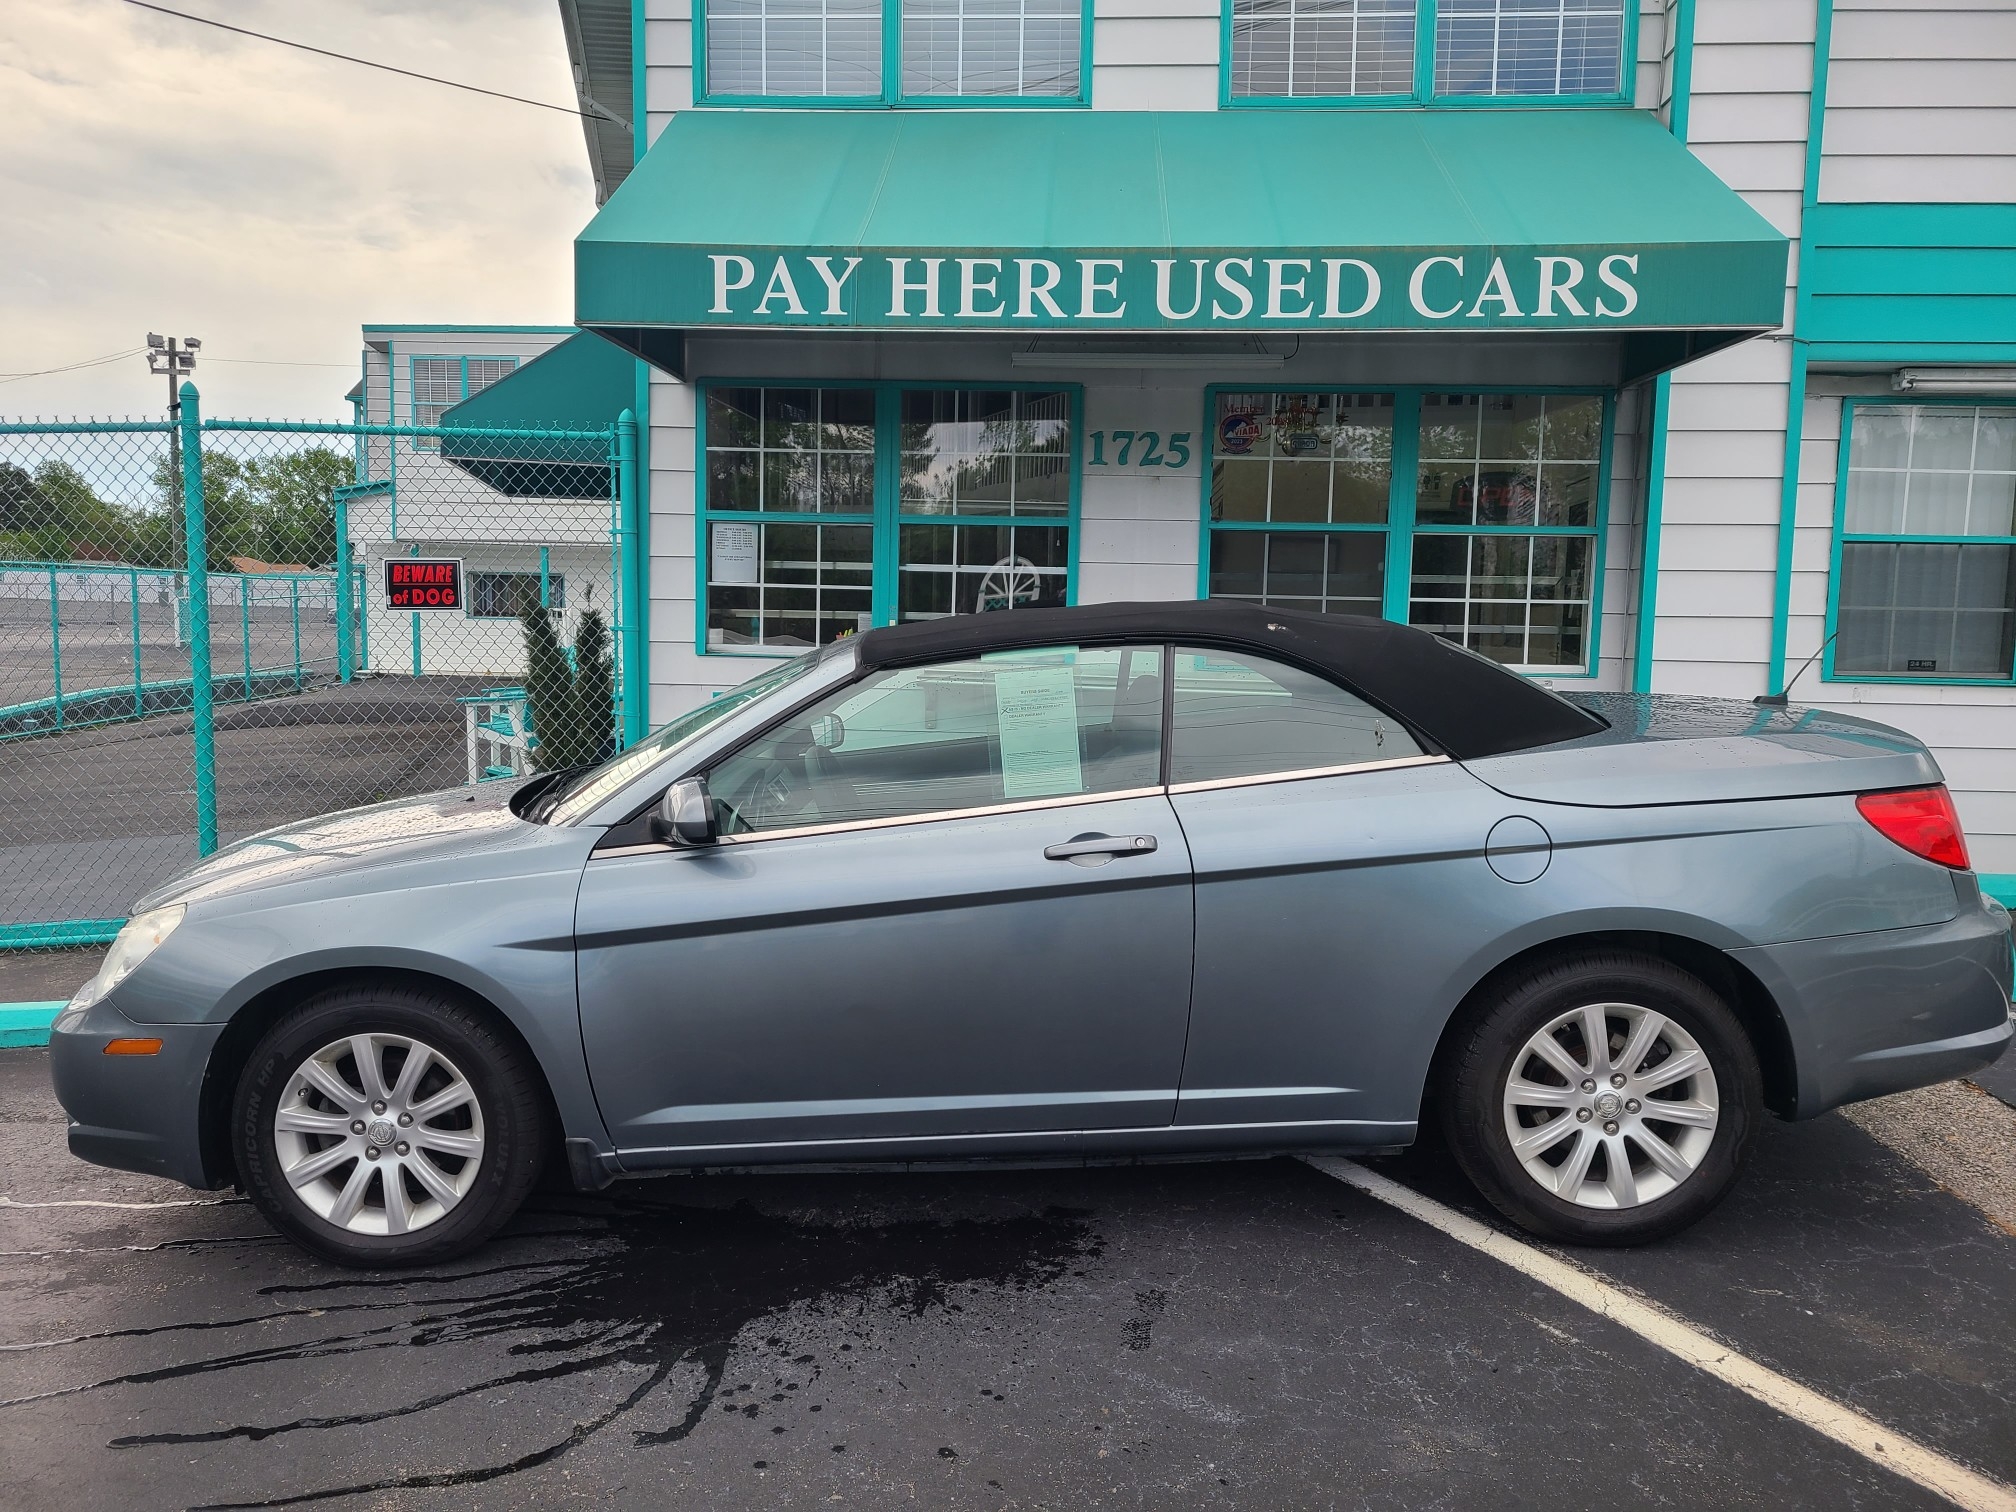 Pay Here Used Cars